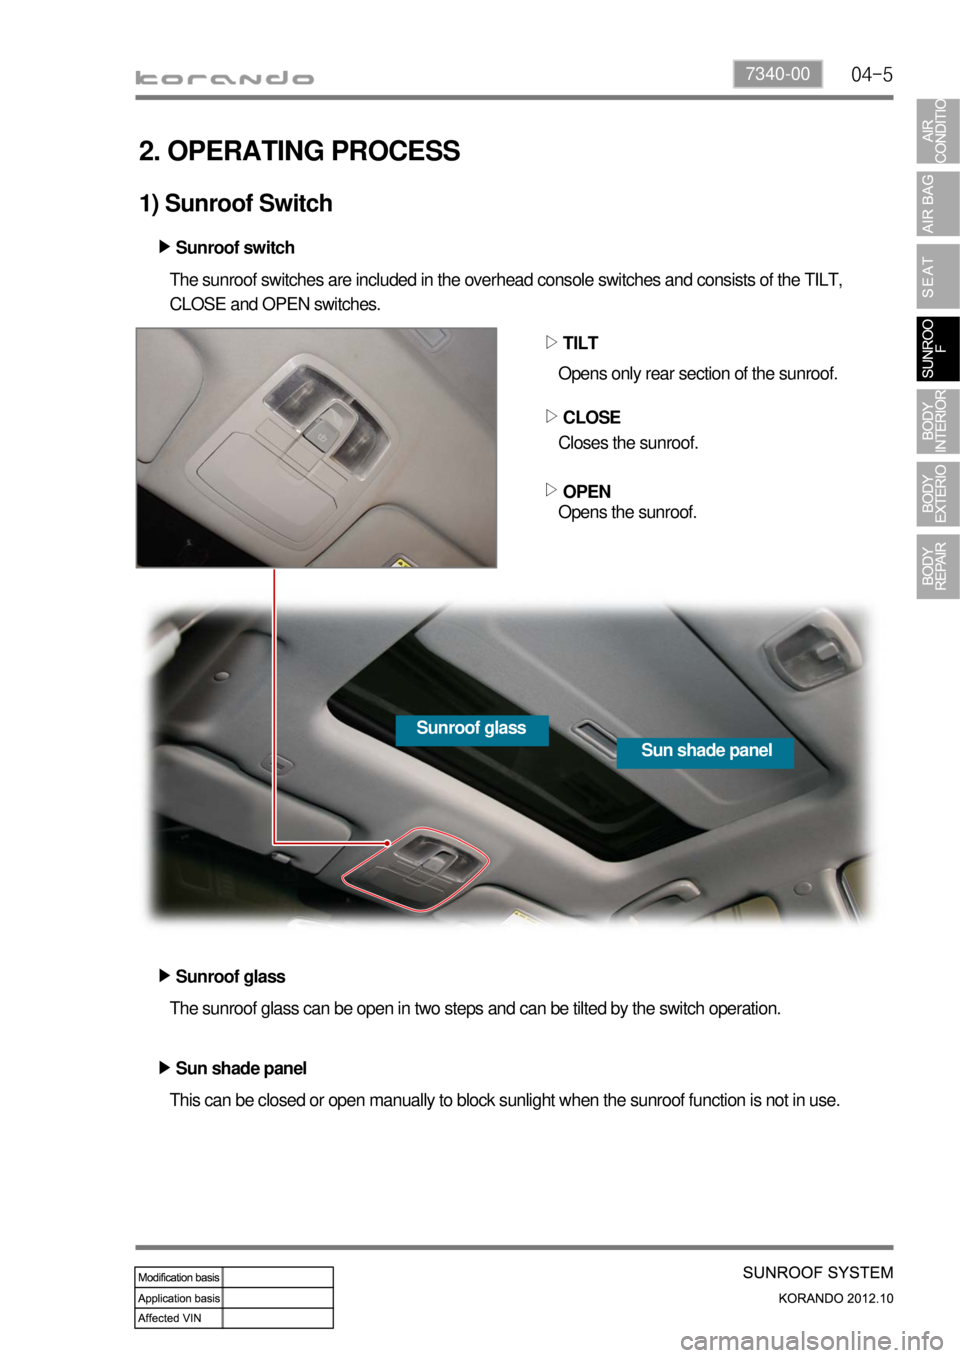 SSANGYONG KORANDO 2012  Service Manual 04-57340-00
2. OPERATING PROCESS
1) Sunroof Switch
This can be closed or open manually to block sunlight when the sunroof function is not in use. The sunroof glass can be open in two steps and can be 